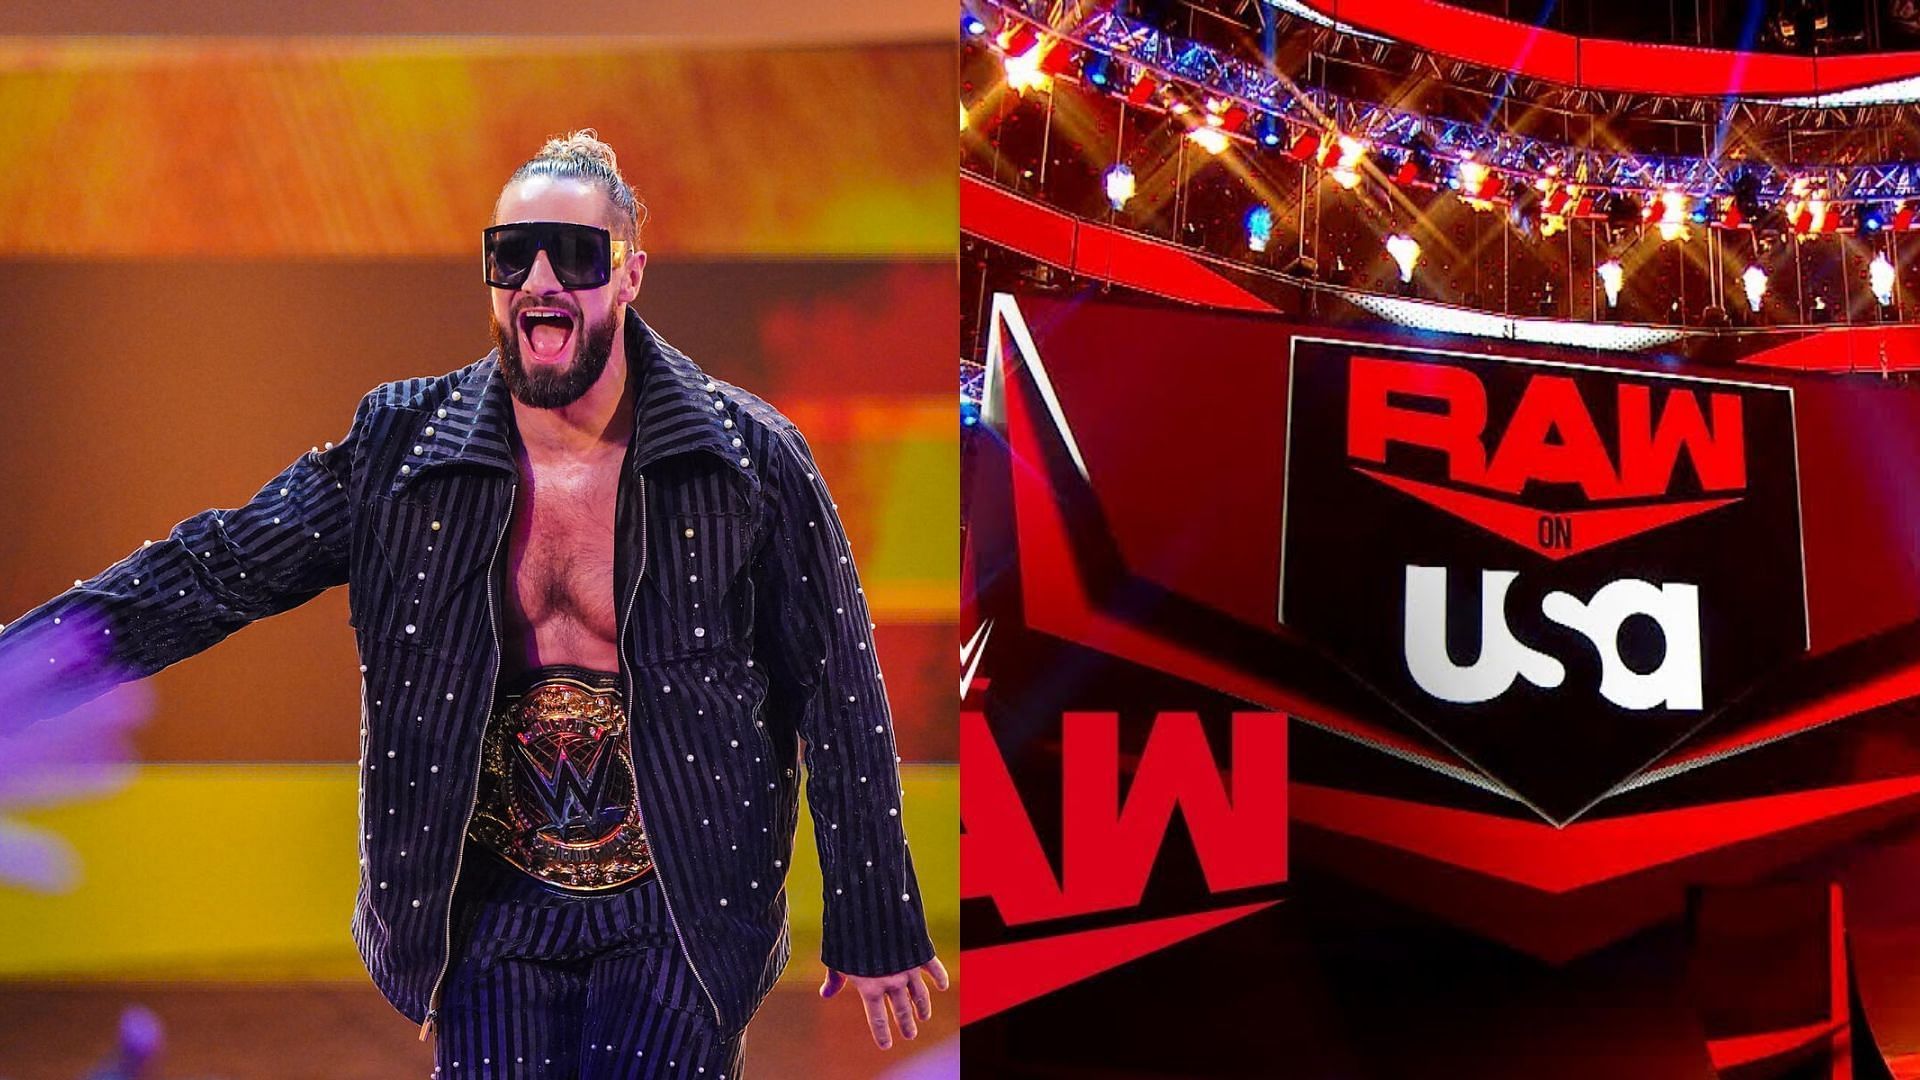 Seth Rollins addressed the WWE Universe this week on RAW